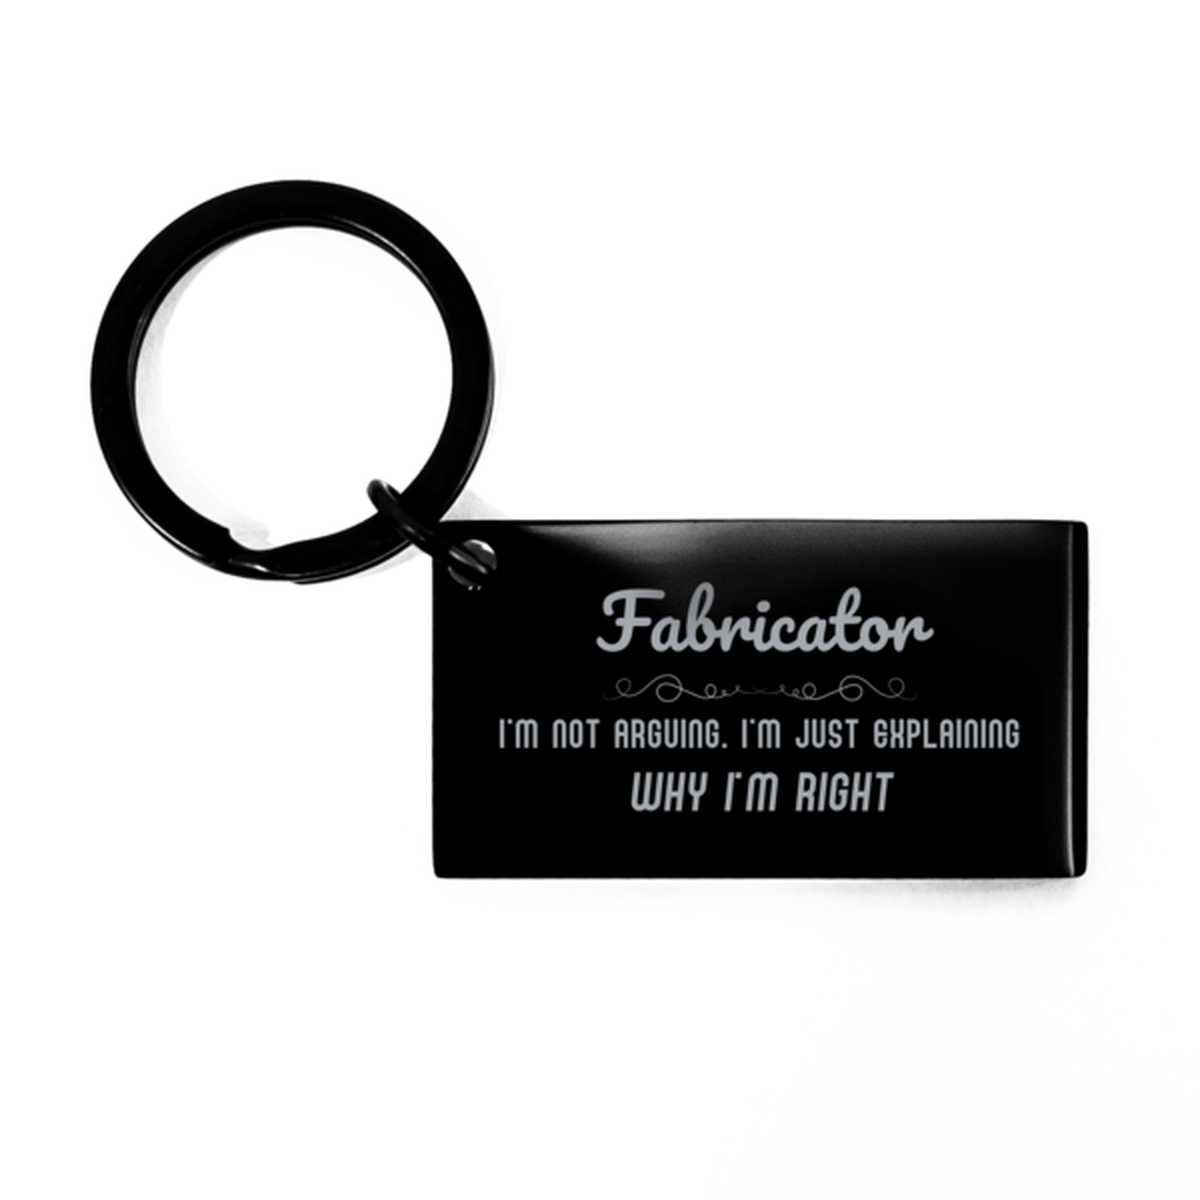 Fabricator I'm not Arguing. I'm Just Explaining Why I'm RIGHT Keychain, Funny Saying Quote Fabricator Gifts For Fabricator Graduation Birthday Christmas Gifts for Men Women Coworker